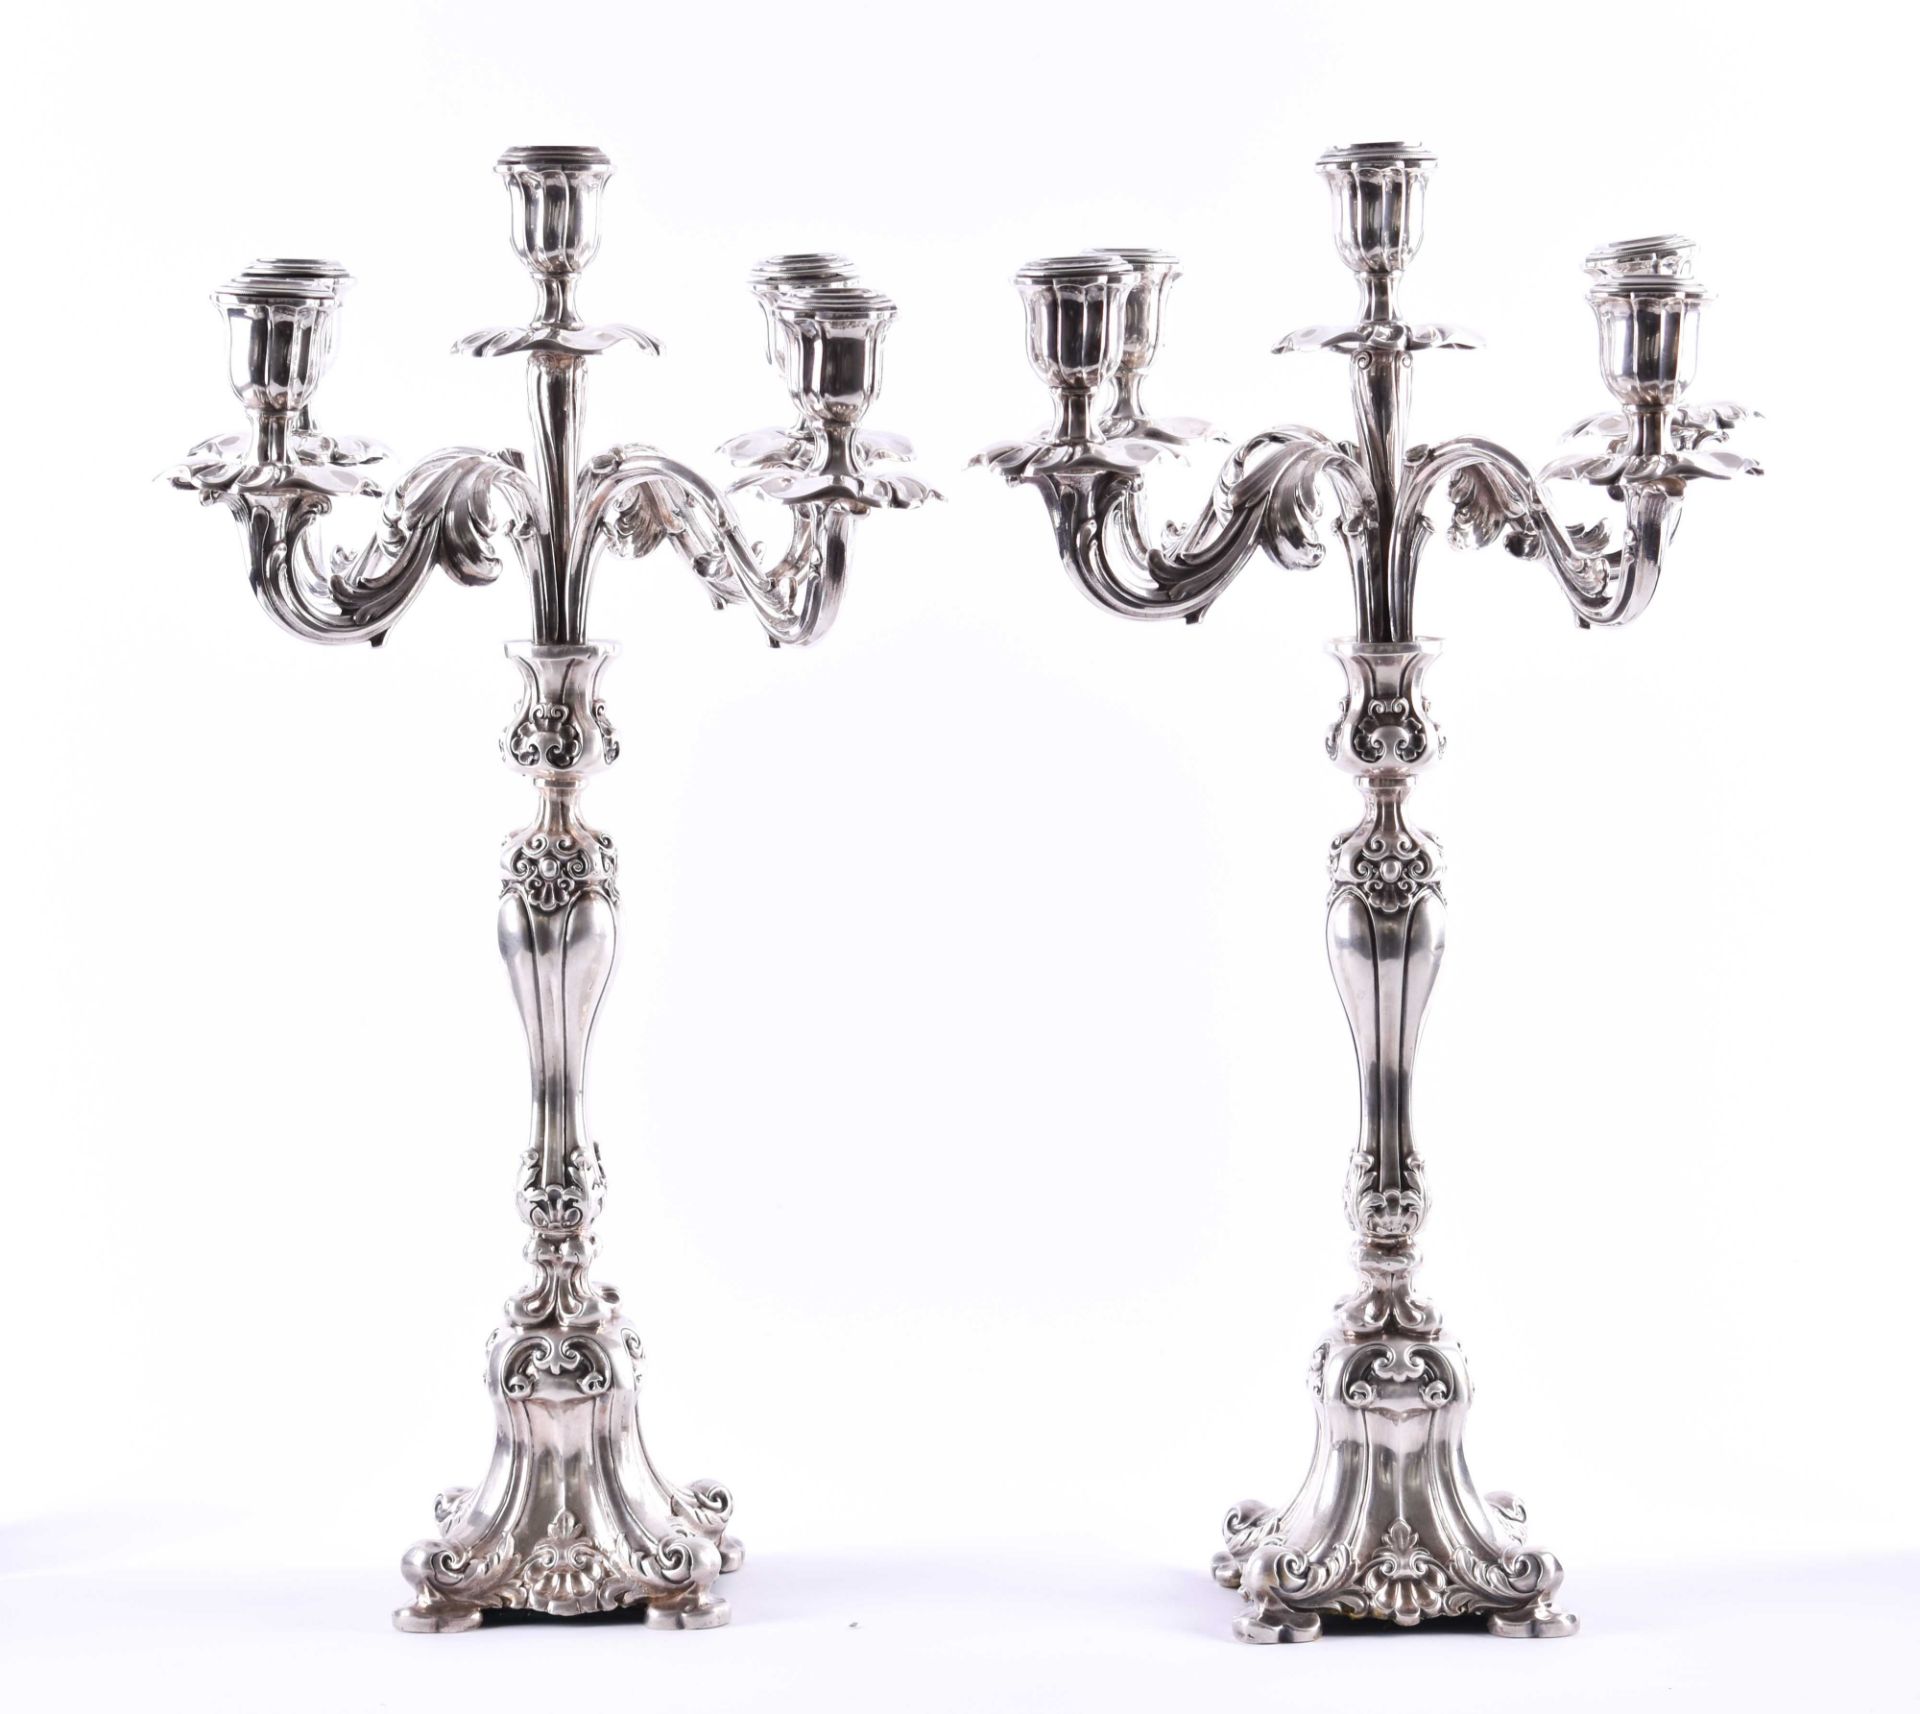 2 five-flame silver girandoles2 large candlesticks, height: 54 cm, in the 19th century, rough